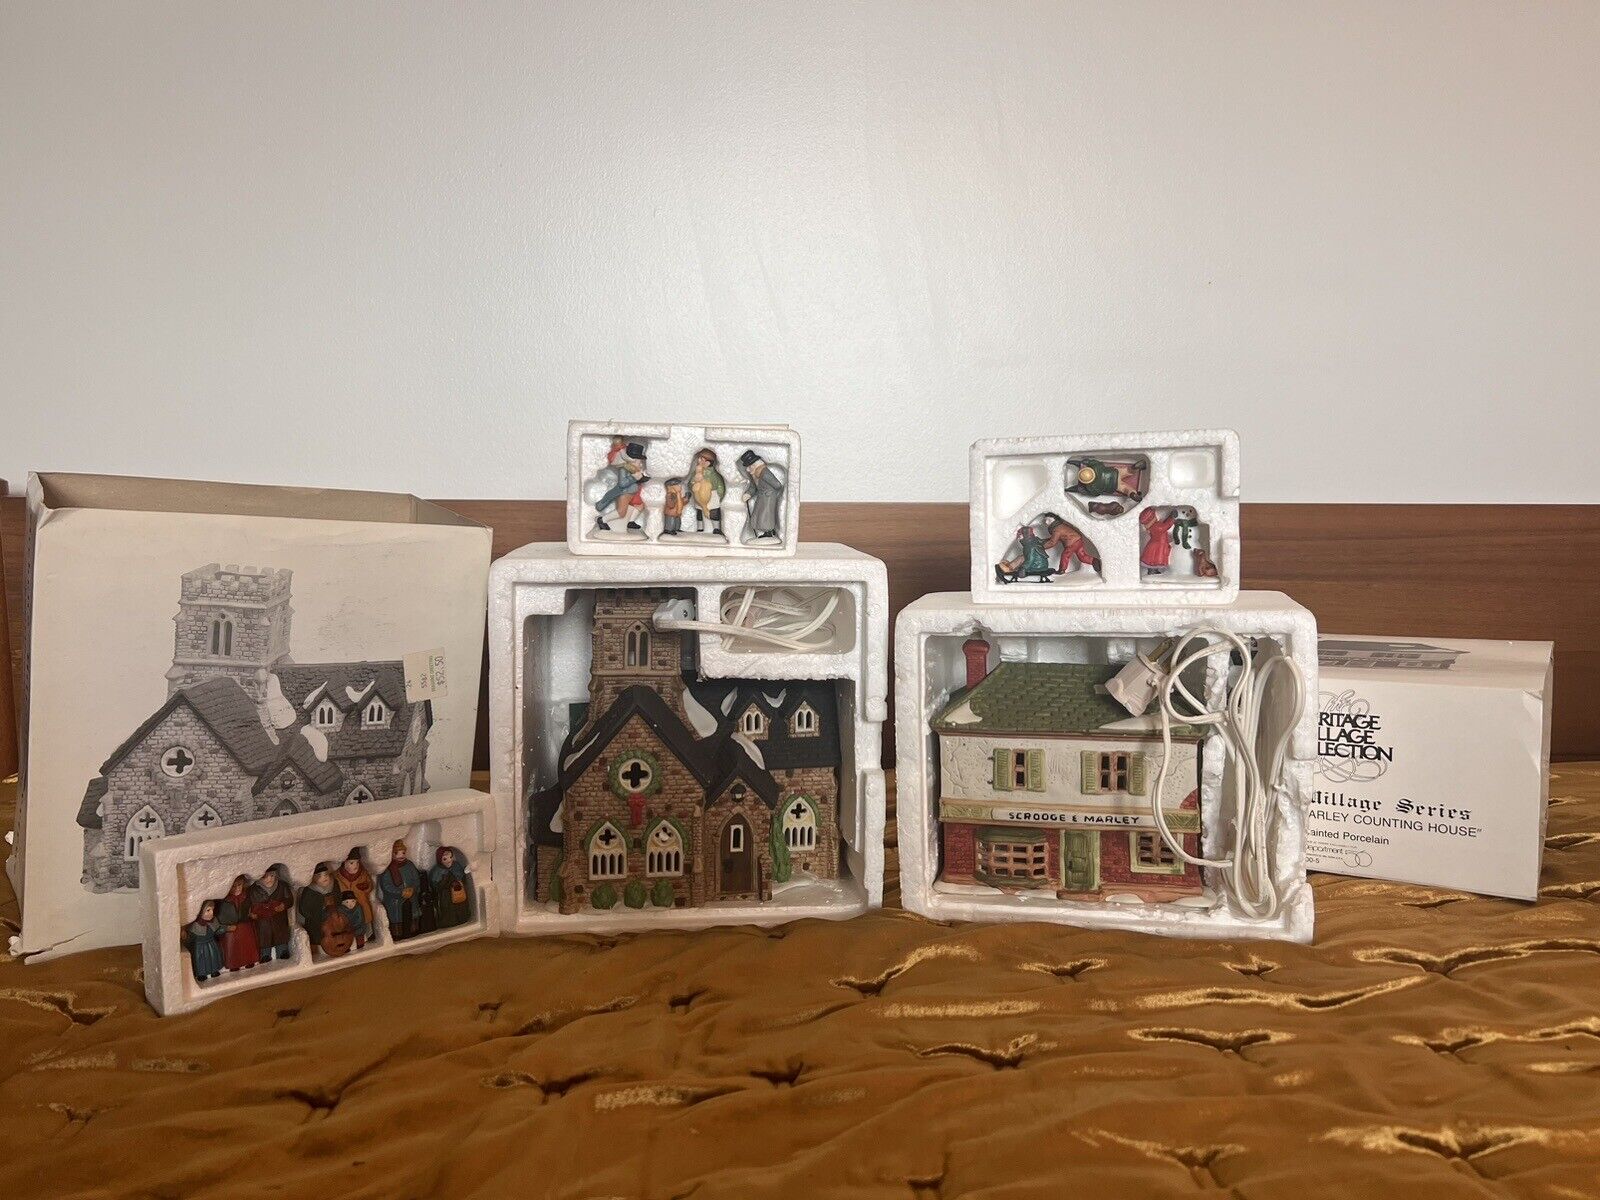 Heritage Village Mix -Knottinghill Church, Scrooge & Marley House, 9 Figurines